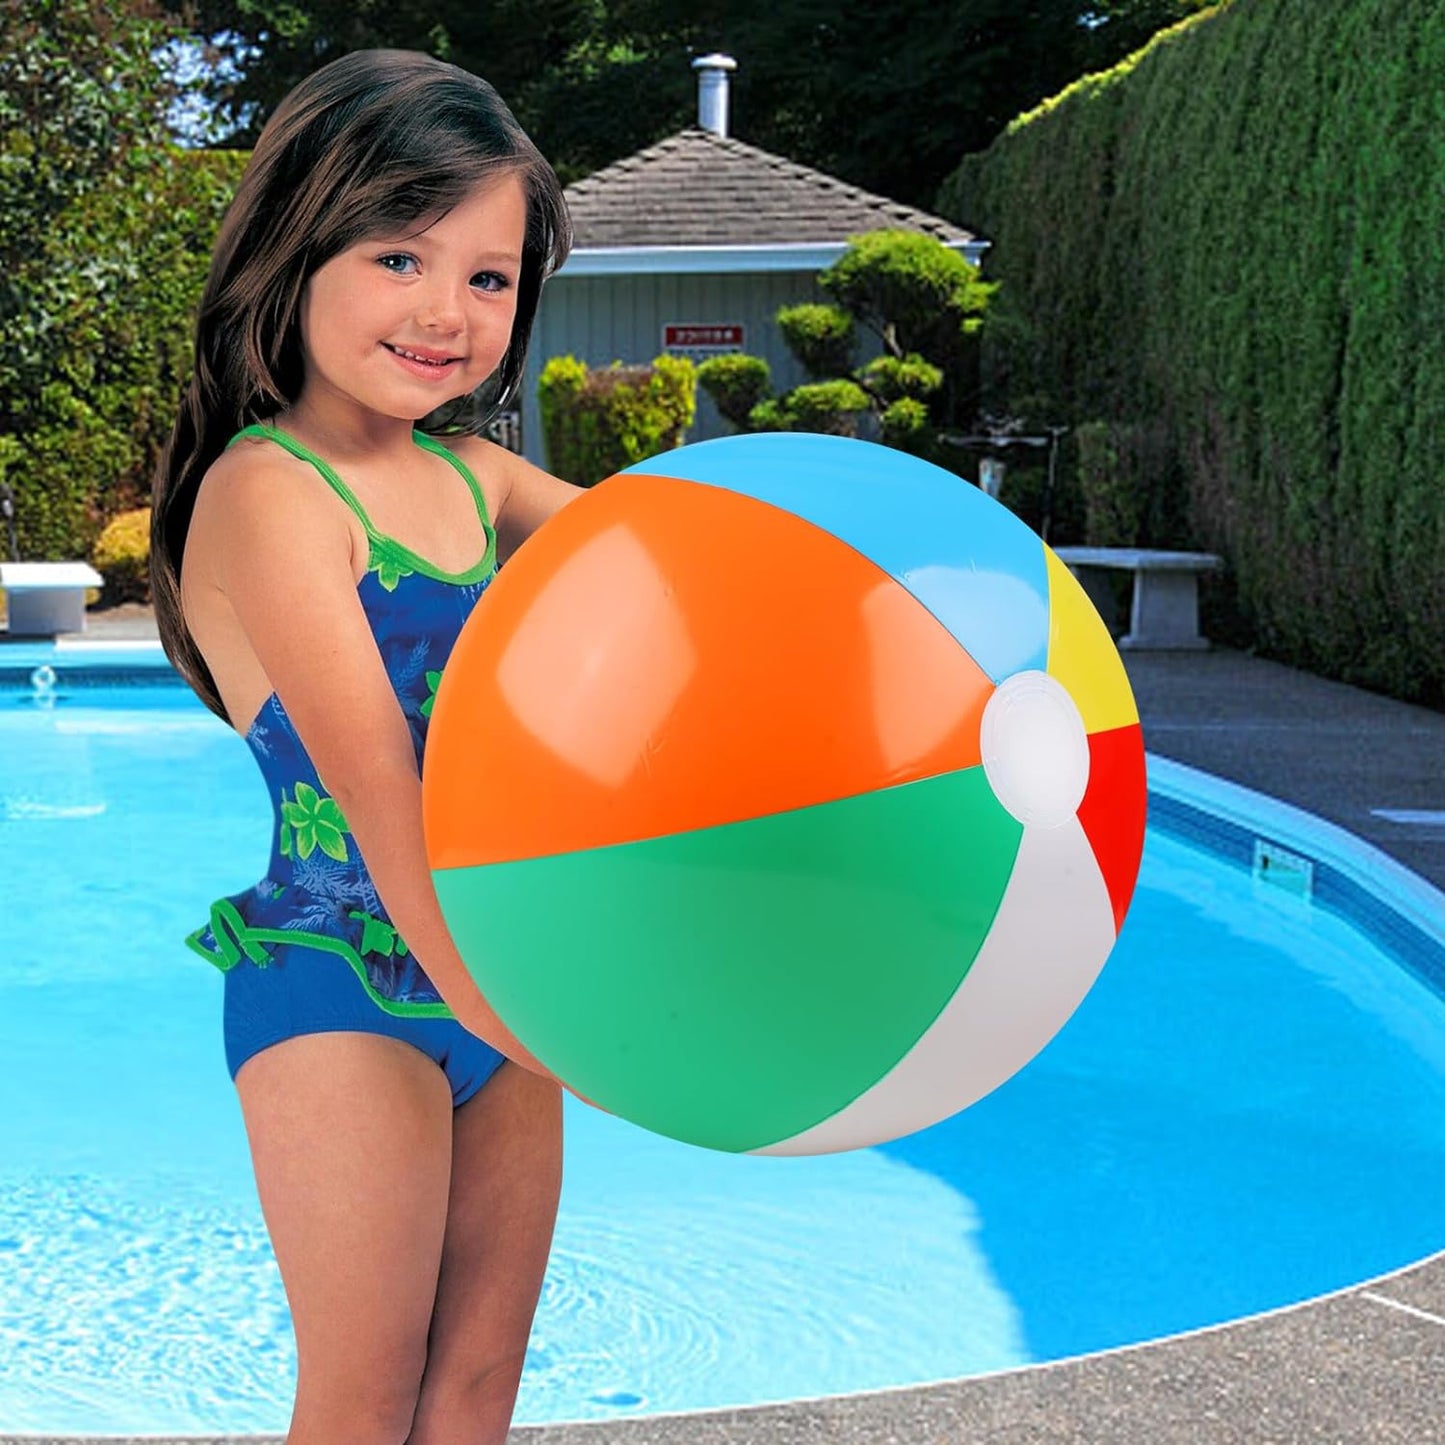 2 Pack Beach Balls, 20 Inch Beach Balls for Kids, Rainbow Color Pool Toys Pool Balls for Swimming Pool, Beach Toys Inflatable Ball for Summer Parties and Water Games